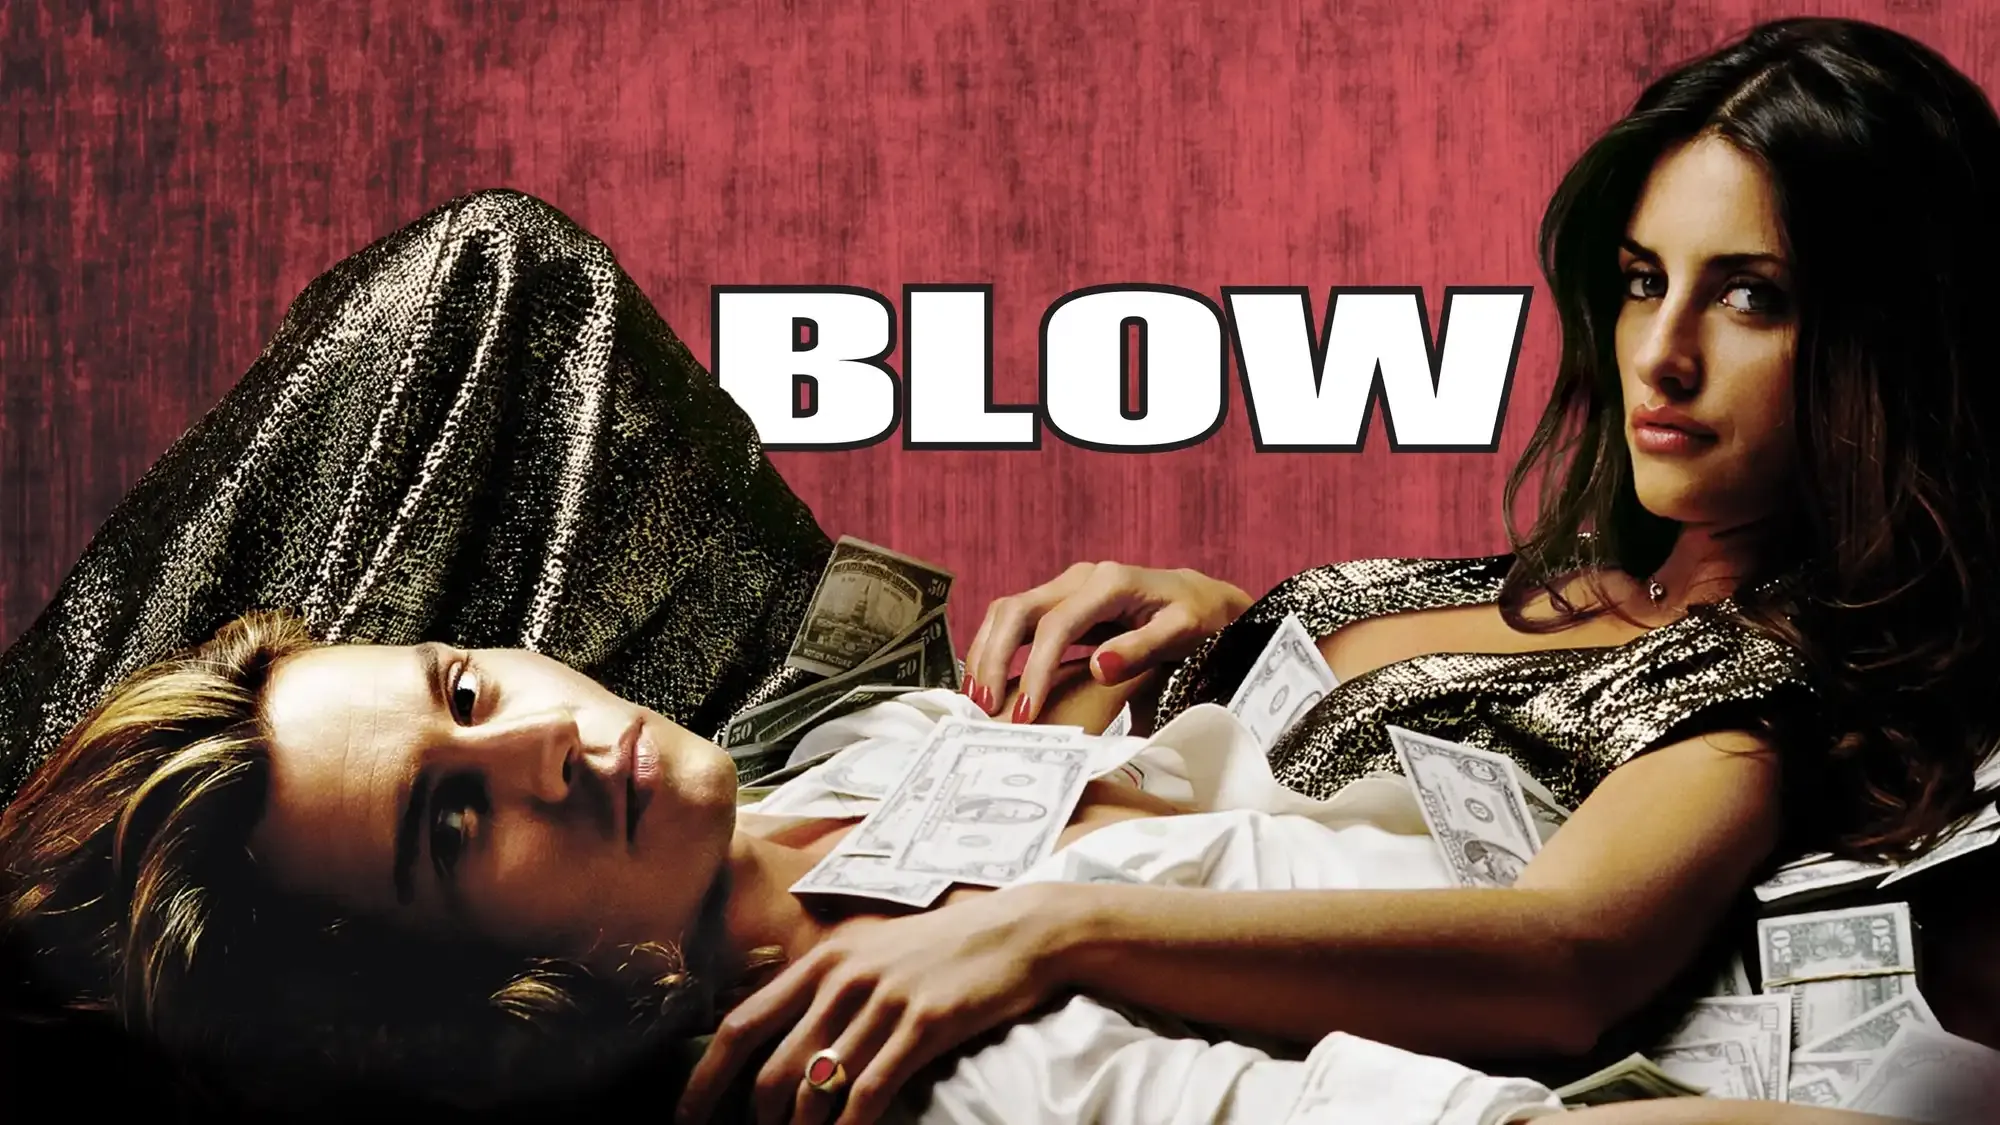 Blow movie review